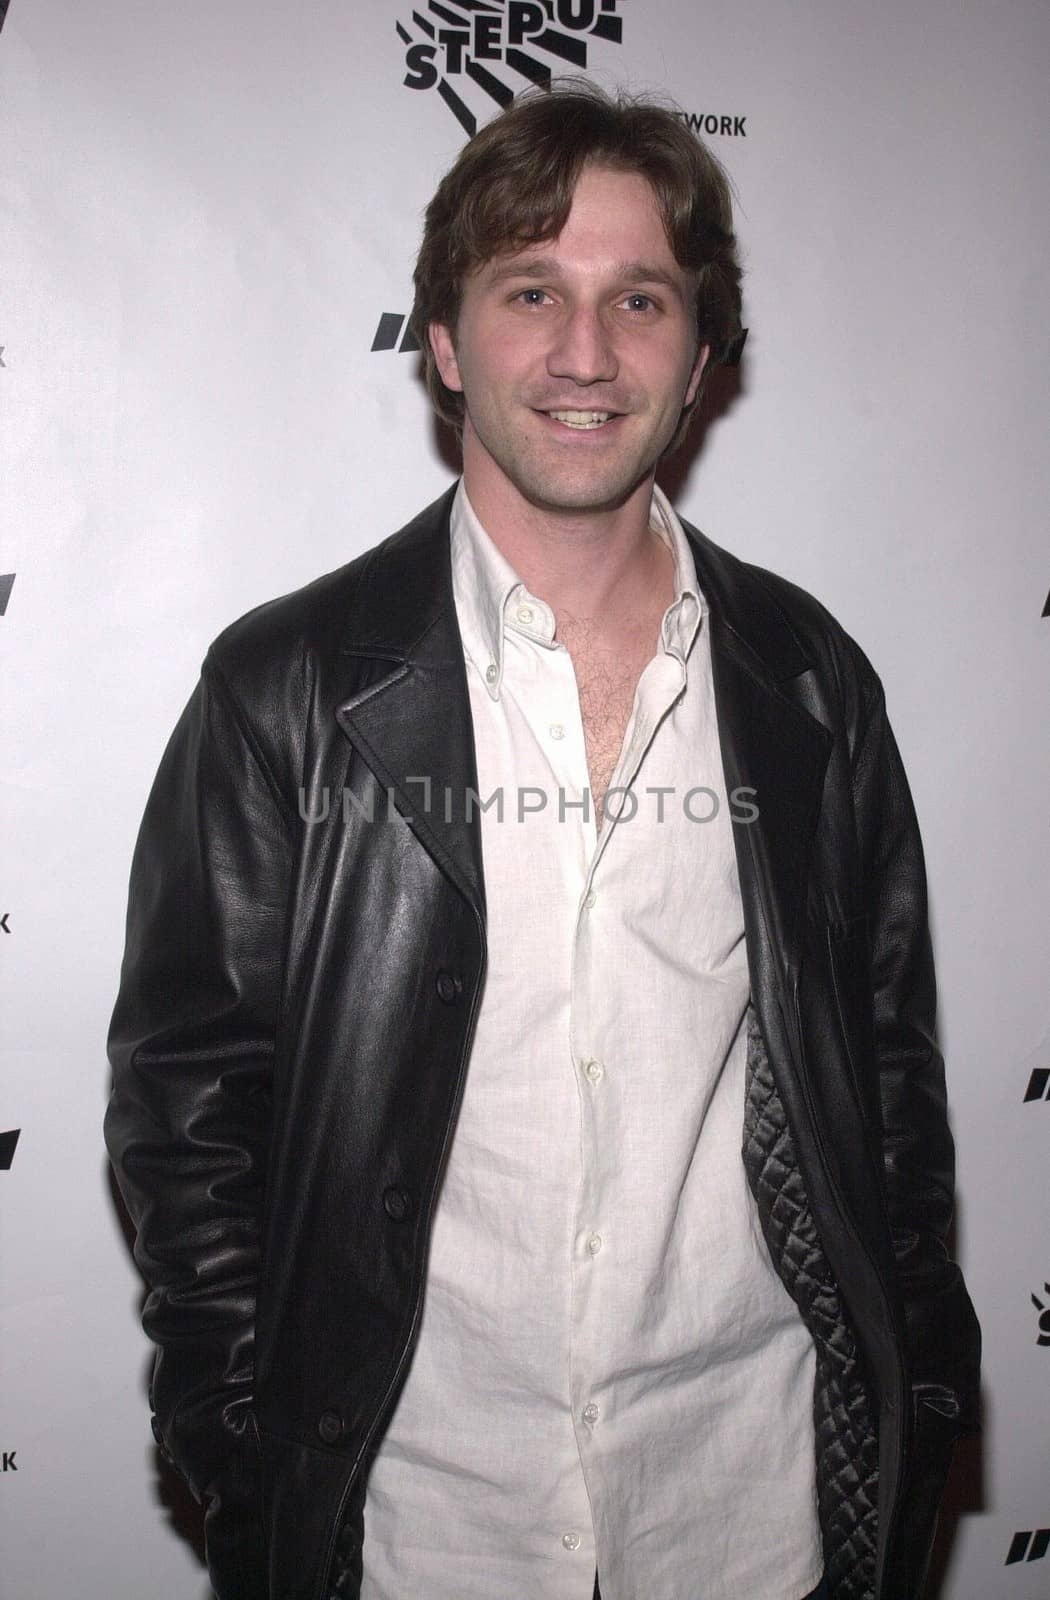 Breckin Meyer at the 3rd Annual Step Up Holiday Party, benefitting UCLA Breast Cancer Research. Presented by StoryBay, Beverly Hills, 12-01-00